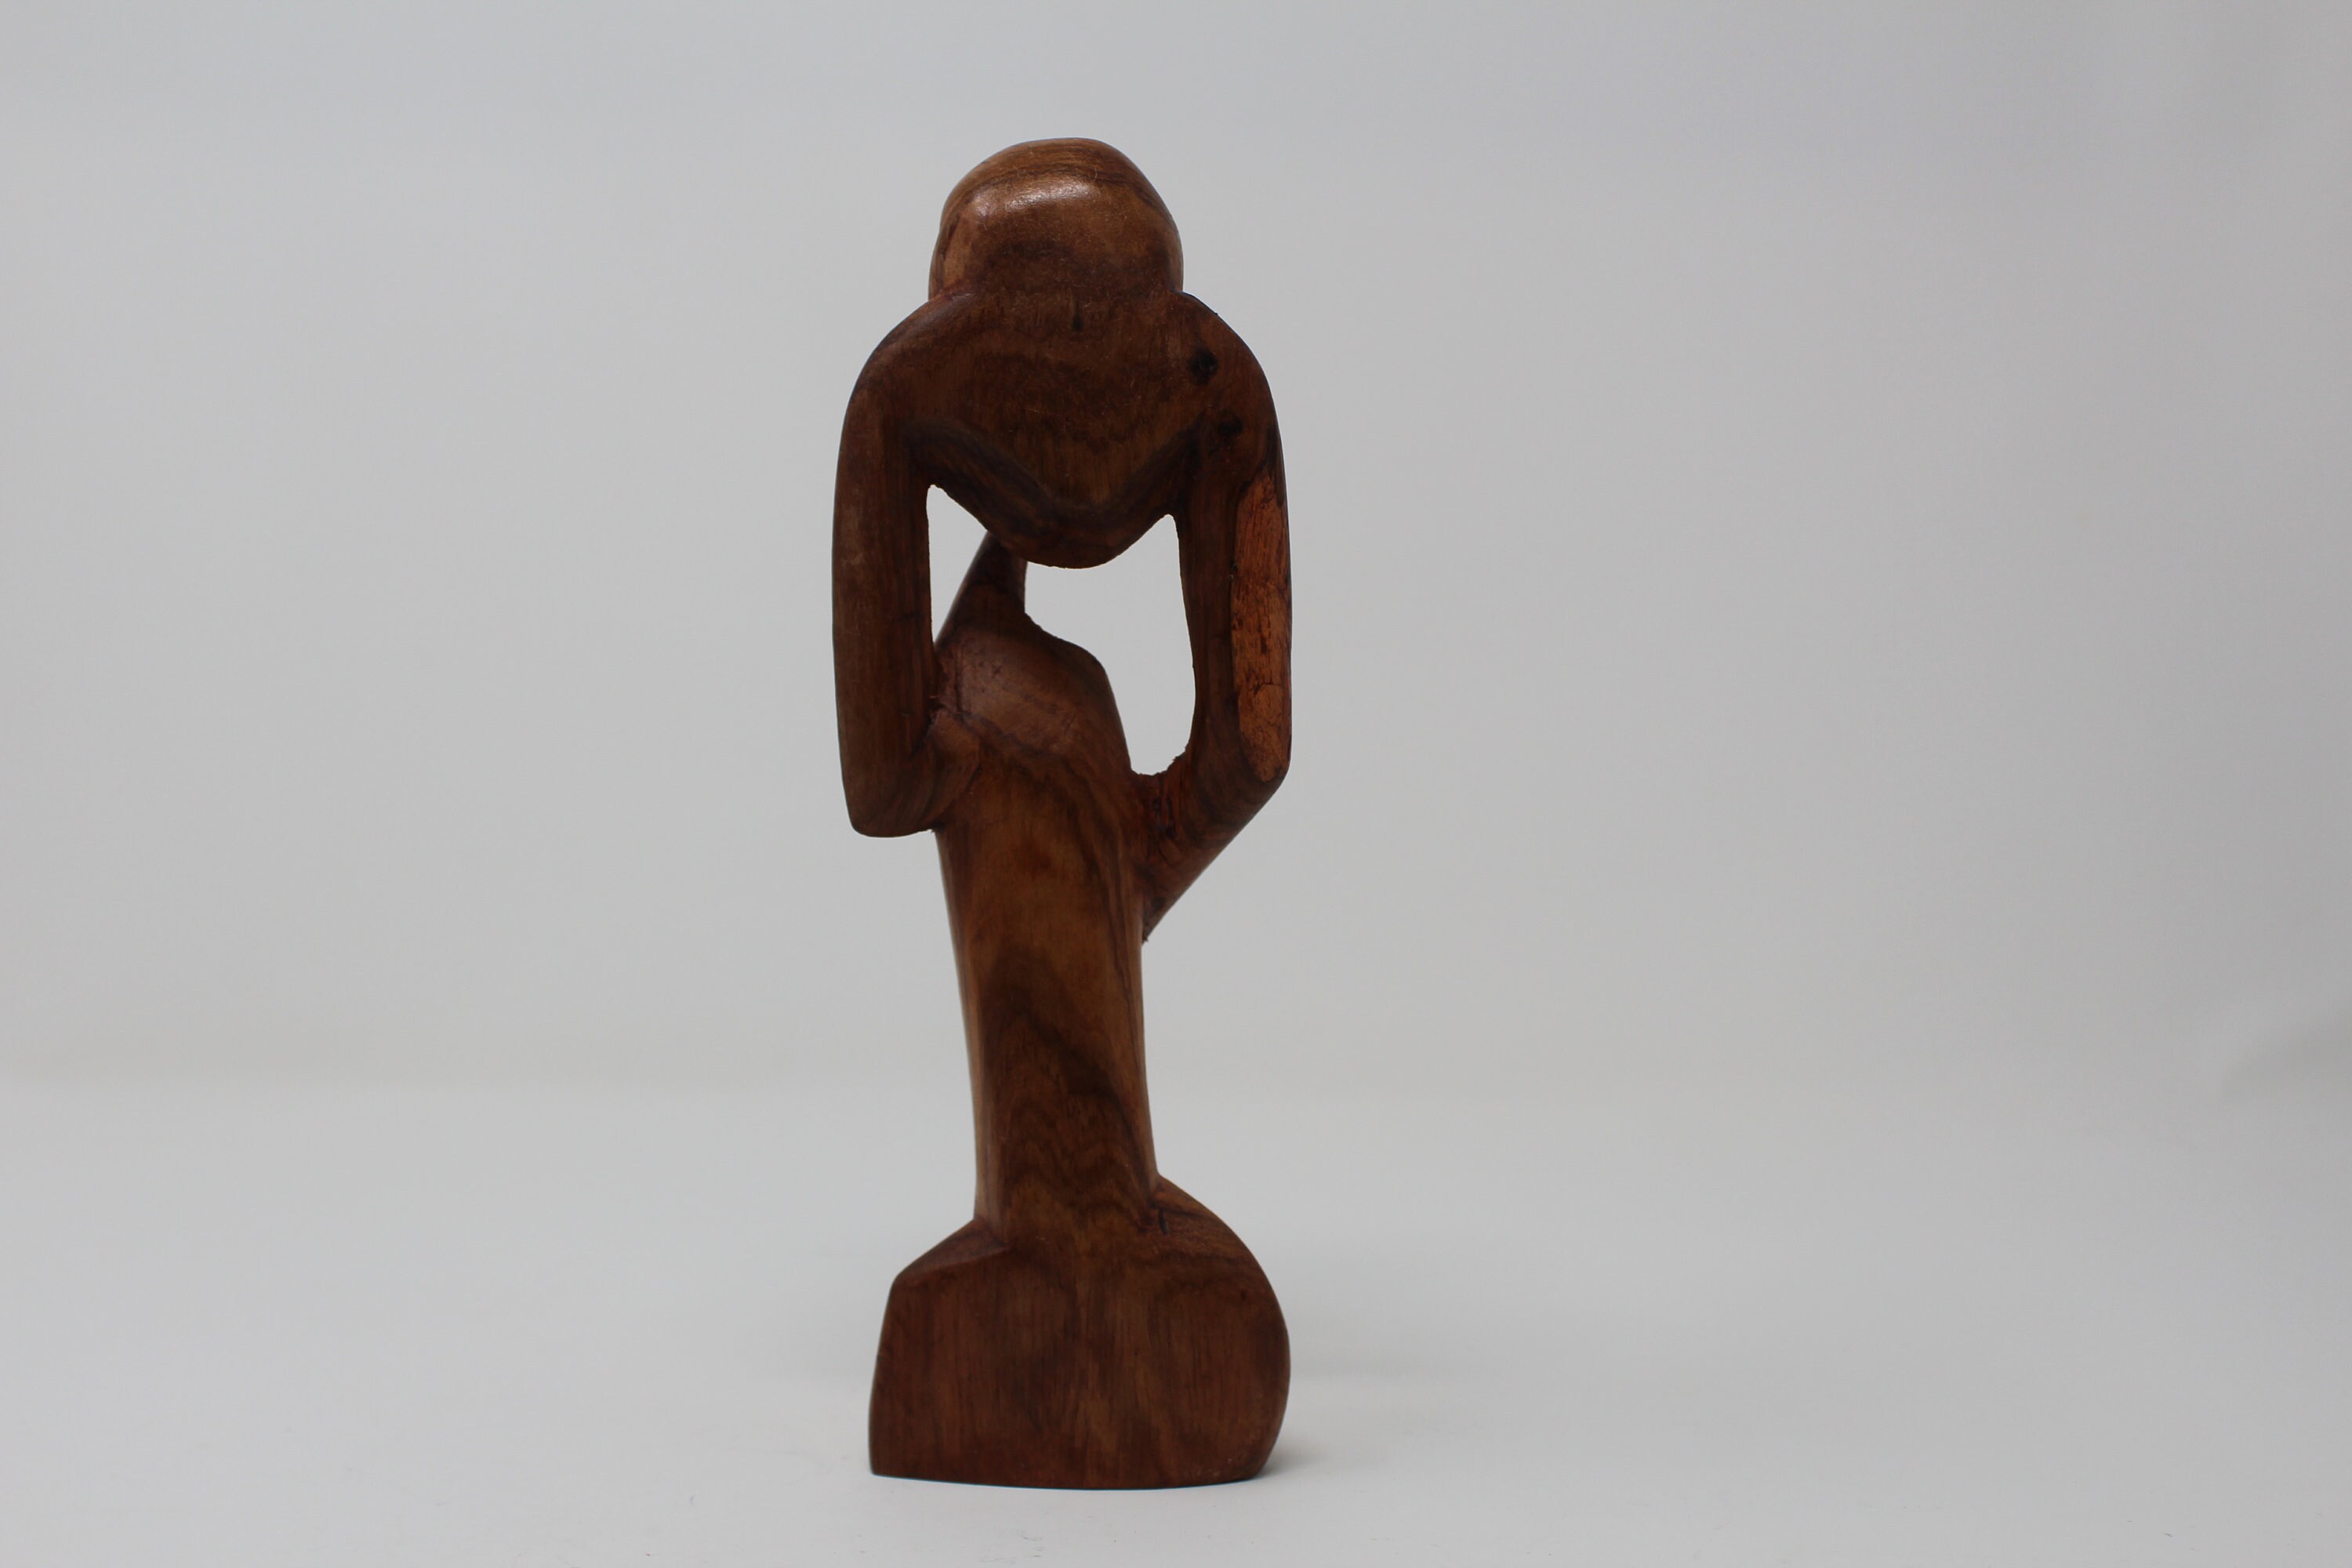 Abstract Wood Sculpture of Man Sitting Down with a Book - Thinker